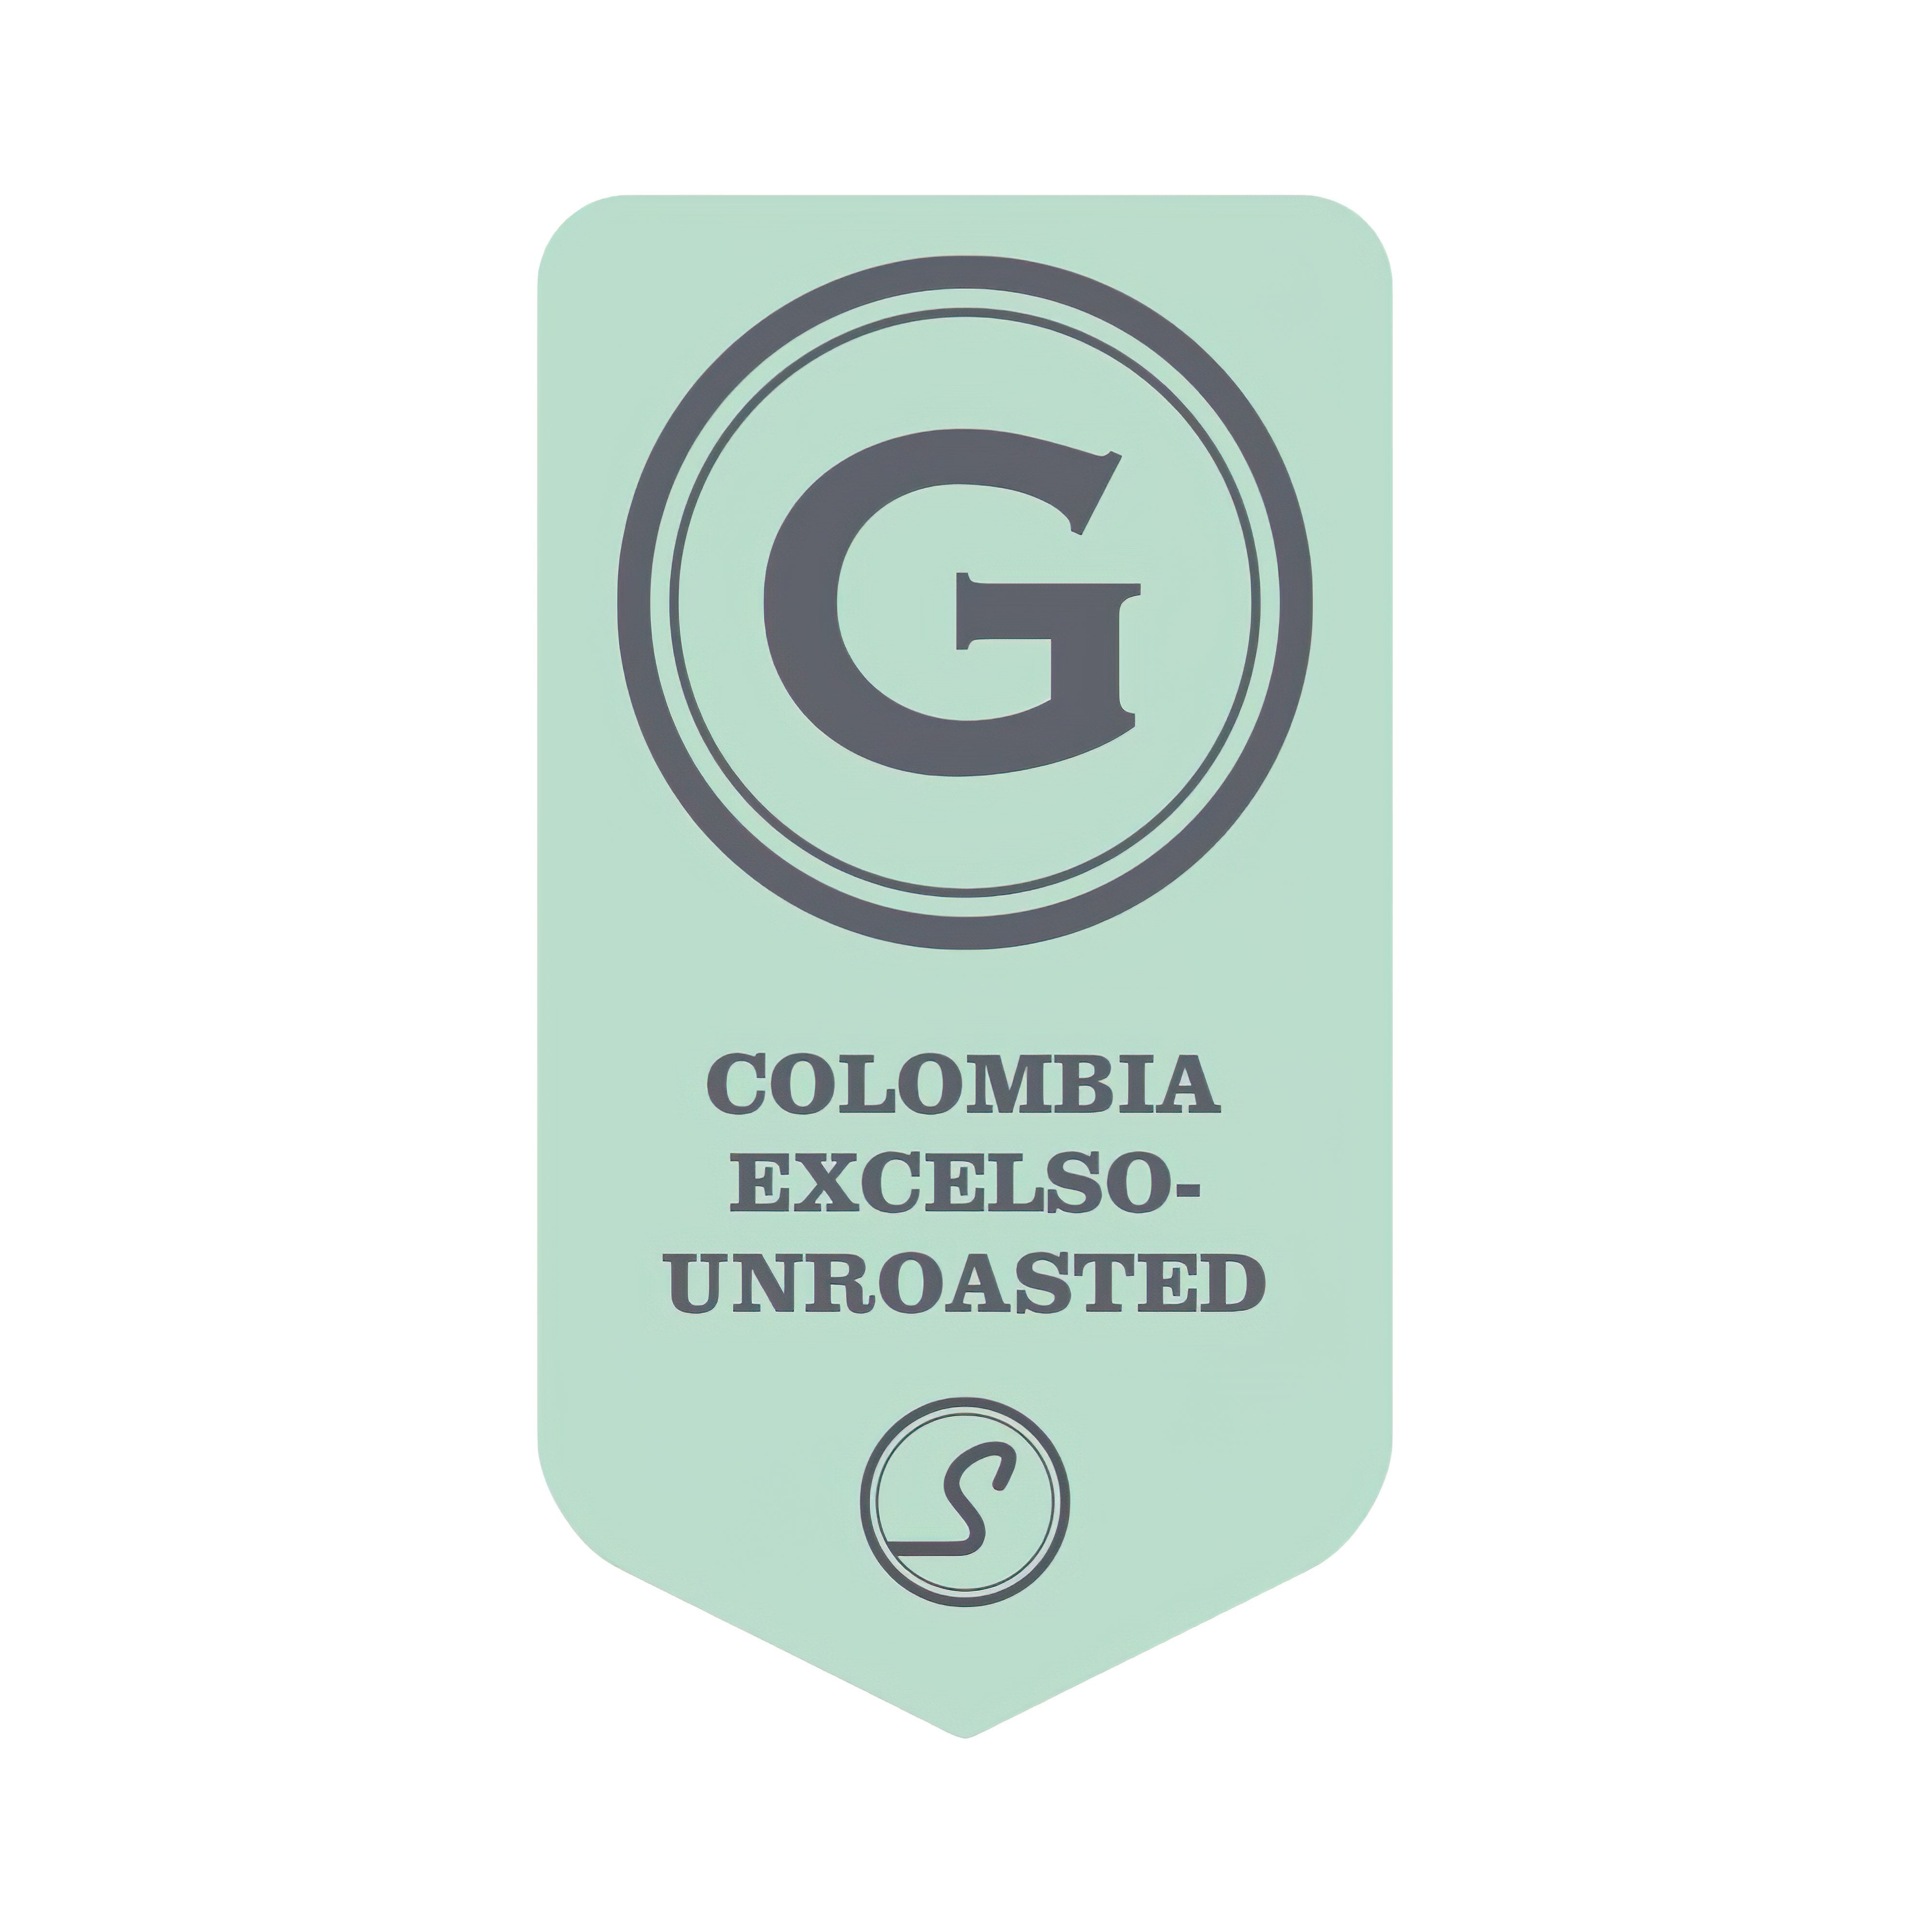 Colombia Excelso - UNROASTED